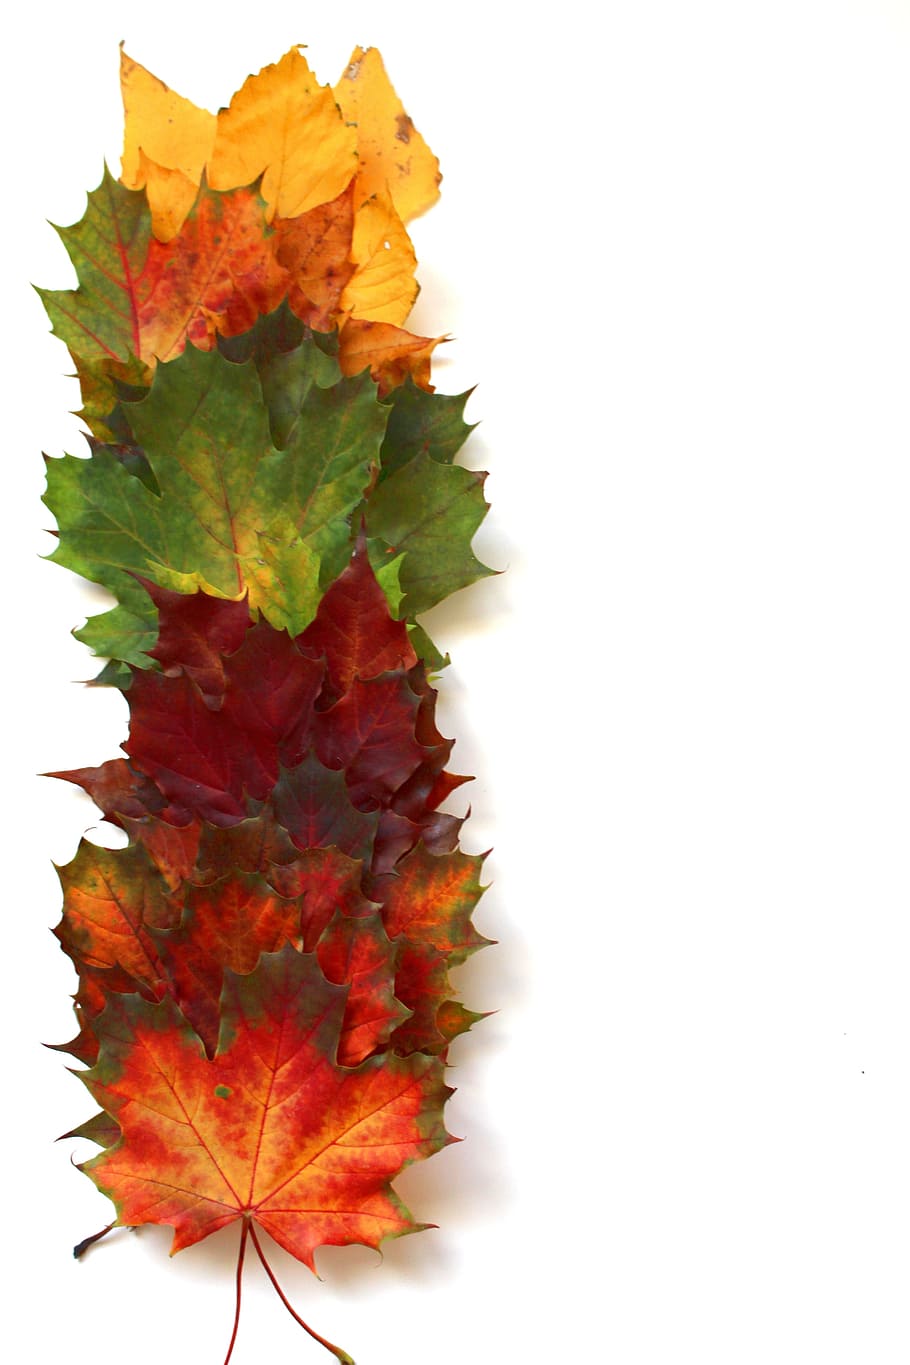 green , red, and yellow maple leaves placed on white surface